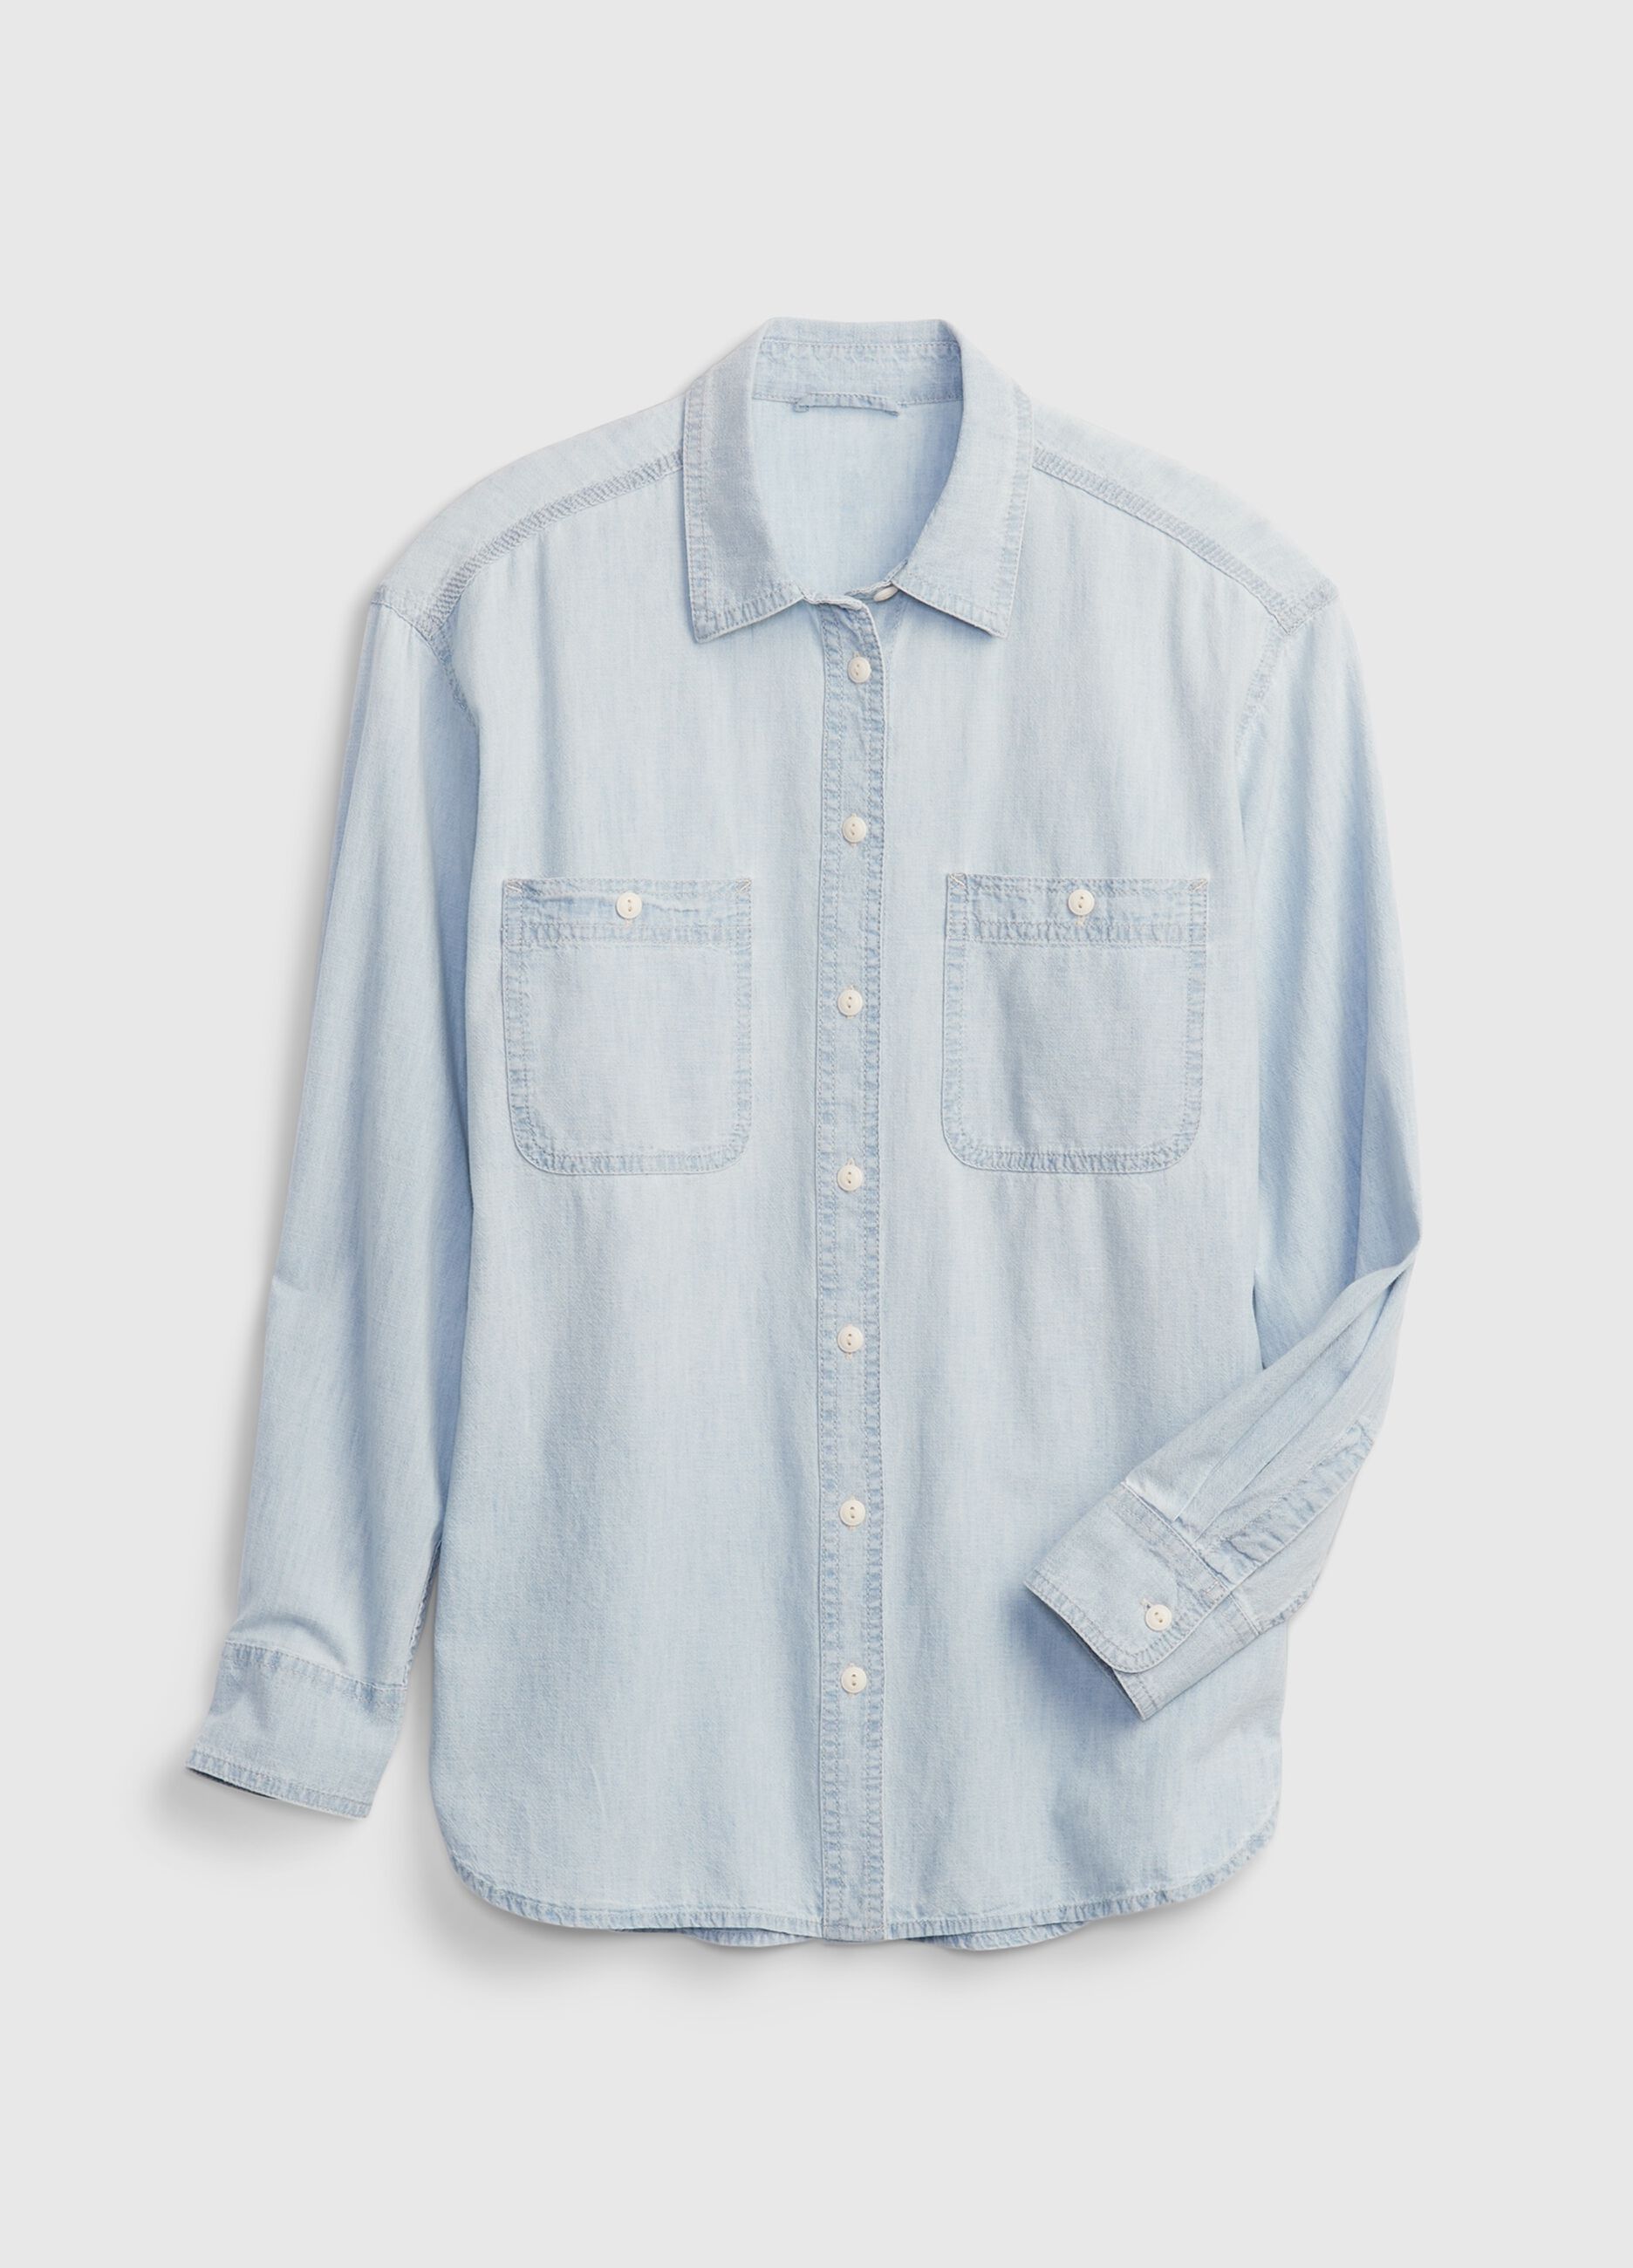 Oversized shirt in denim with pockets